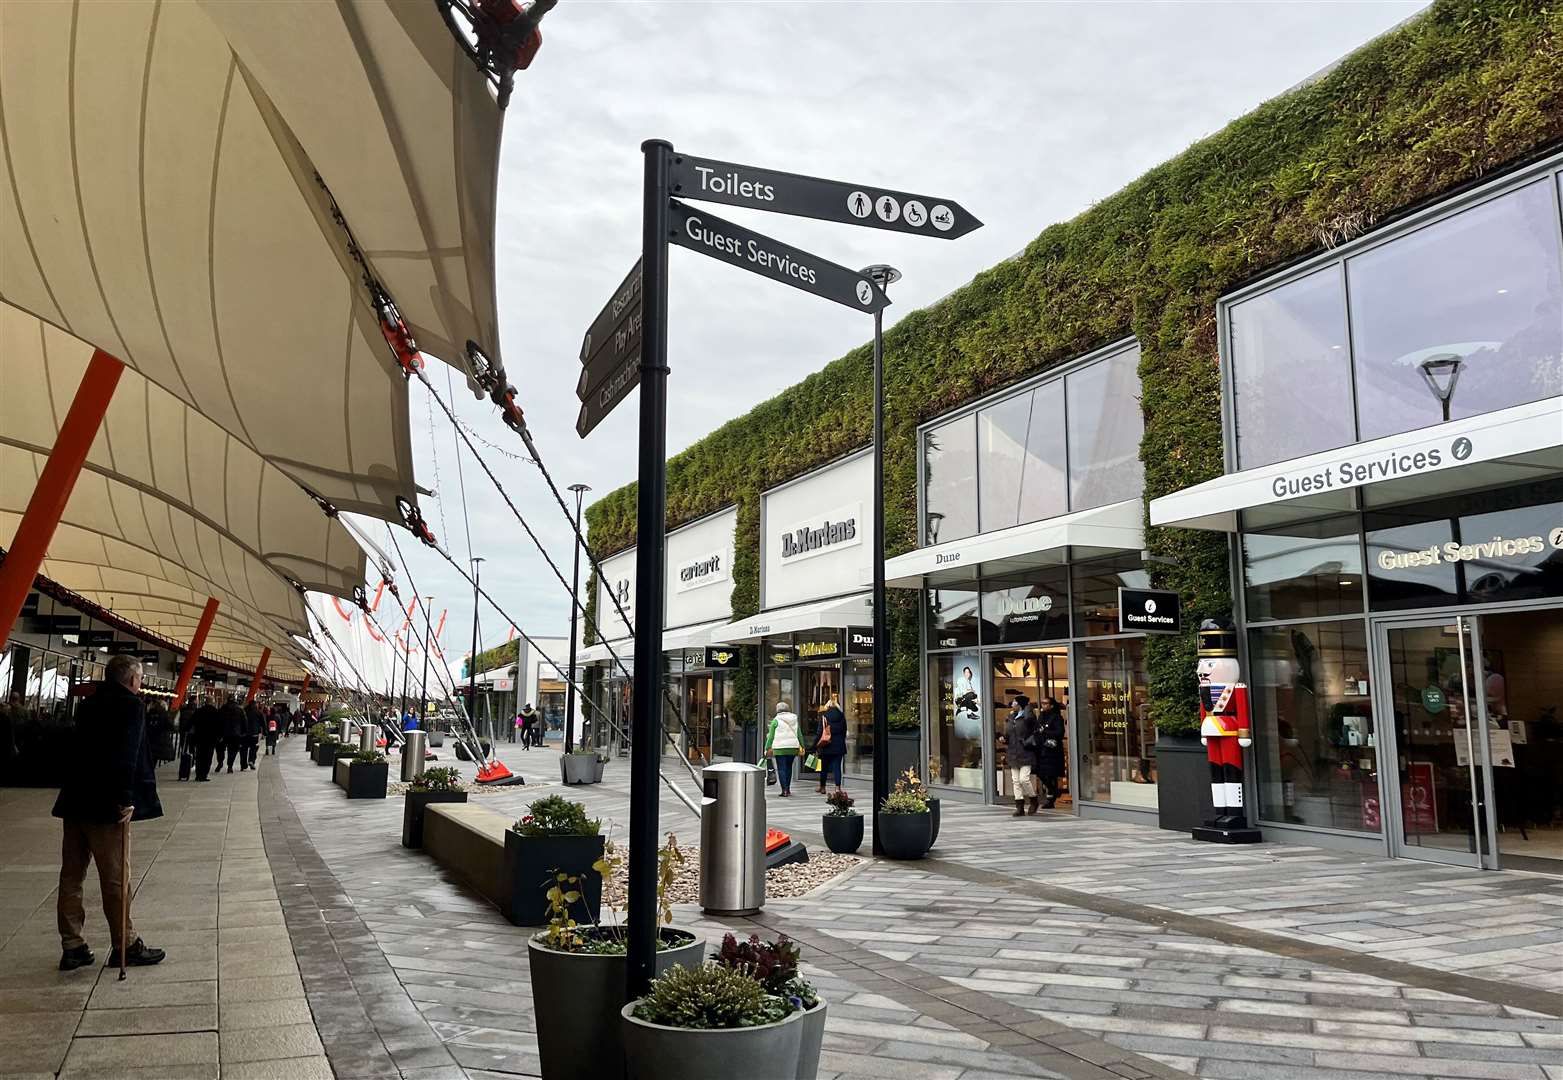 Ashford Designer Outlet is now home to more than 100 shops